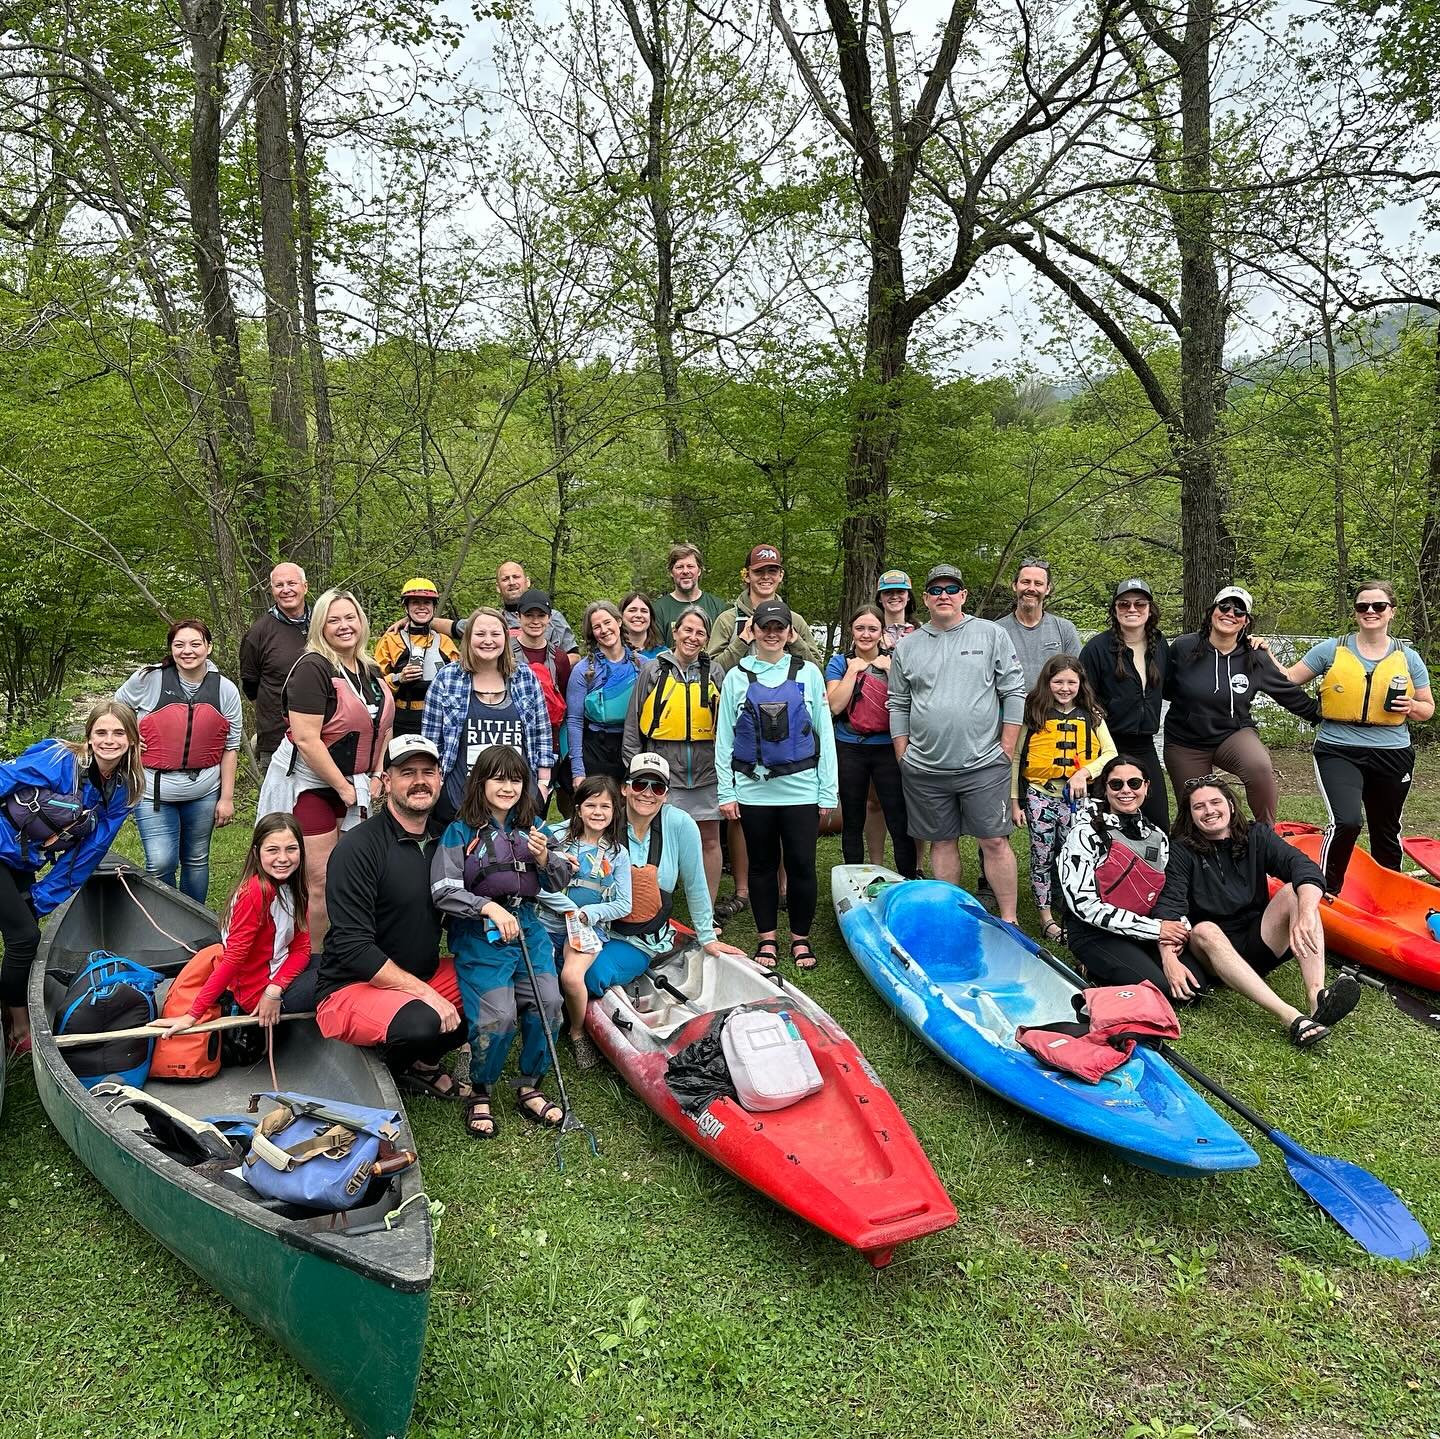 Happy Earth Day everyone! 🌎
This past Saturday, in honor of Earth Day, we hosted a Little River Paddle Cleanup, and 30 volunteers braved some not so promising weather to come out and help us do our part to clean up the Little River! 
We were able to